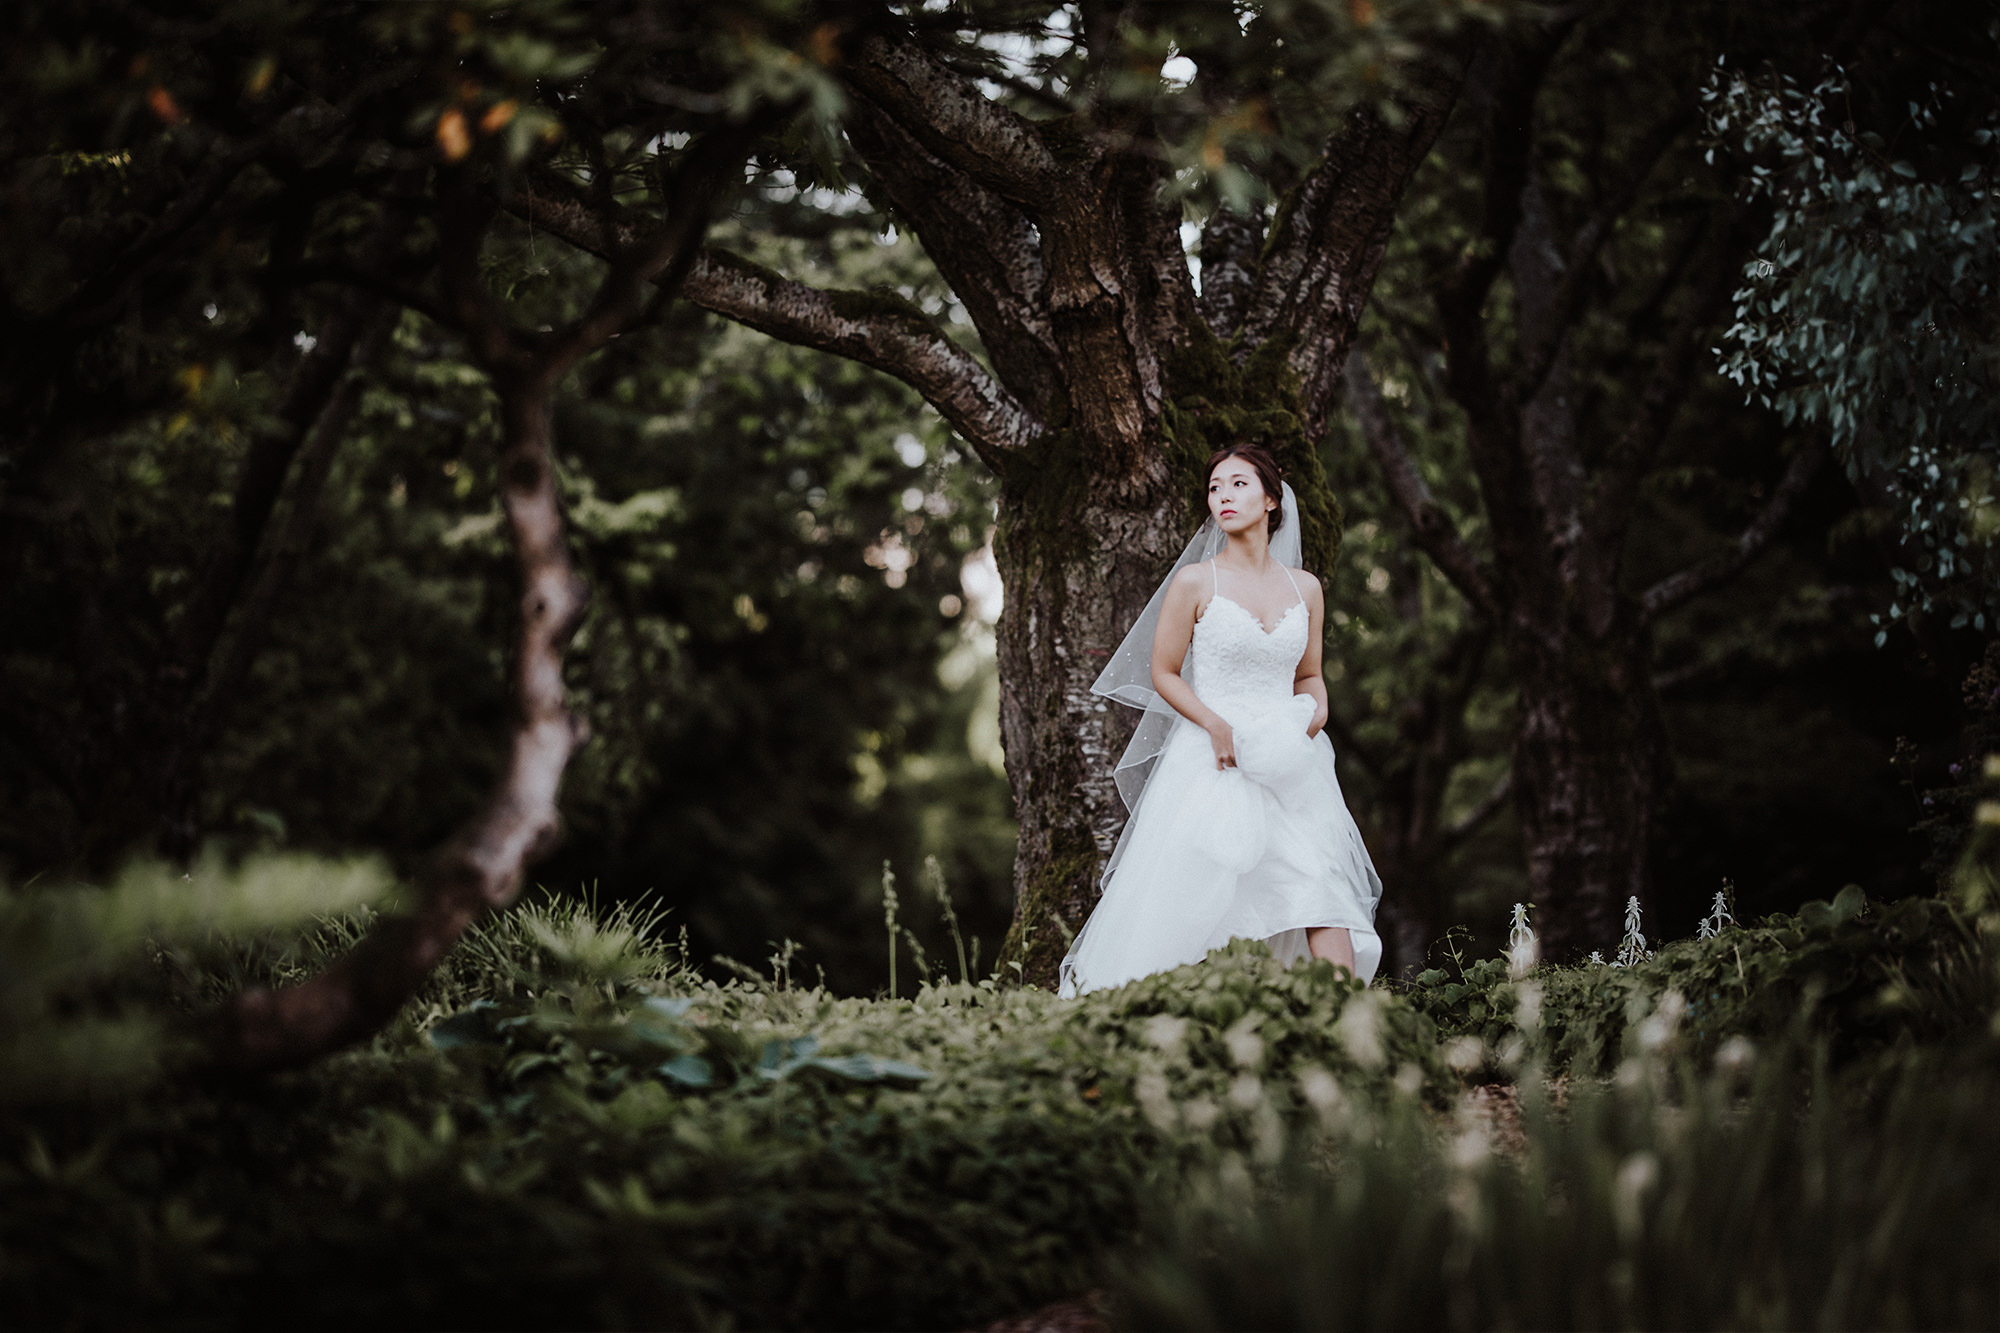 A bride walks alone in a forest looking off into the distance